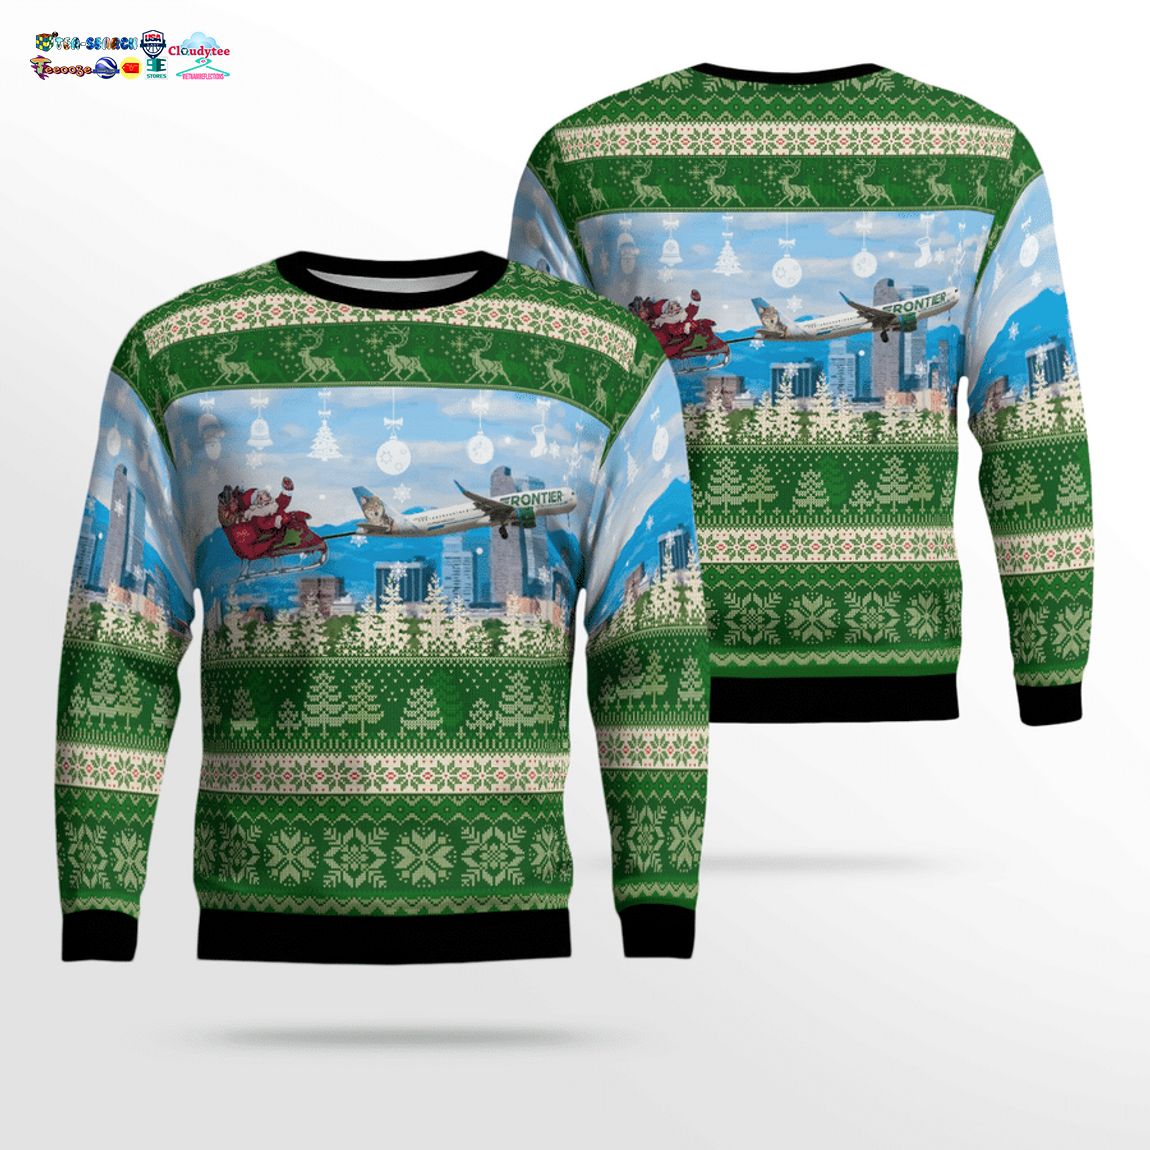 Frontier Airlines Airbus A321-211 With Santa Over Denver 3D Christmas Sweater